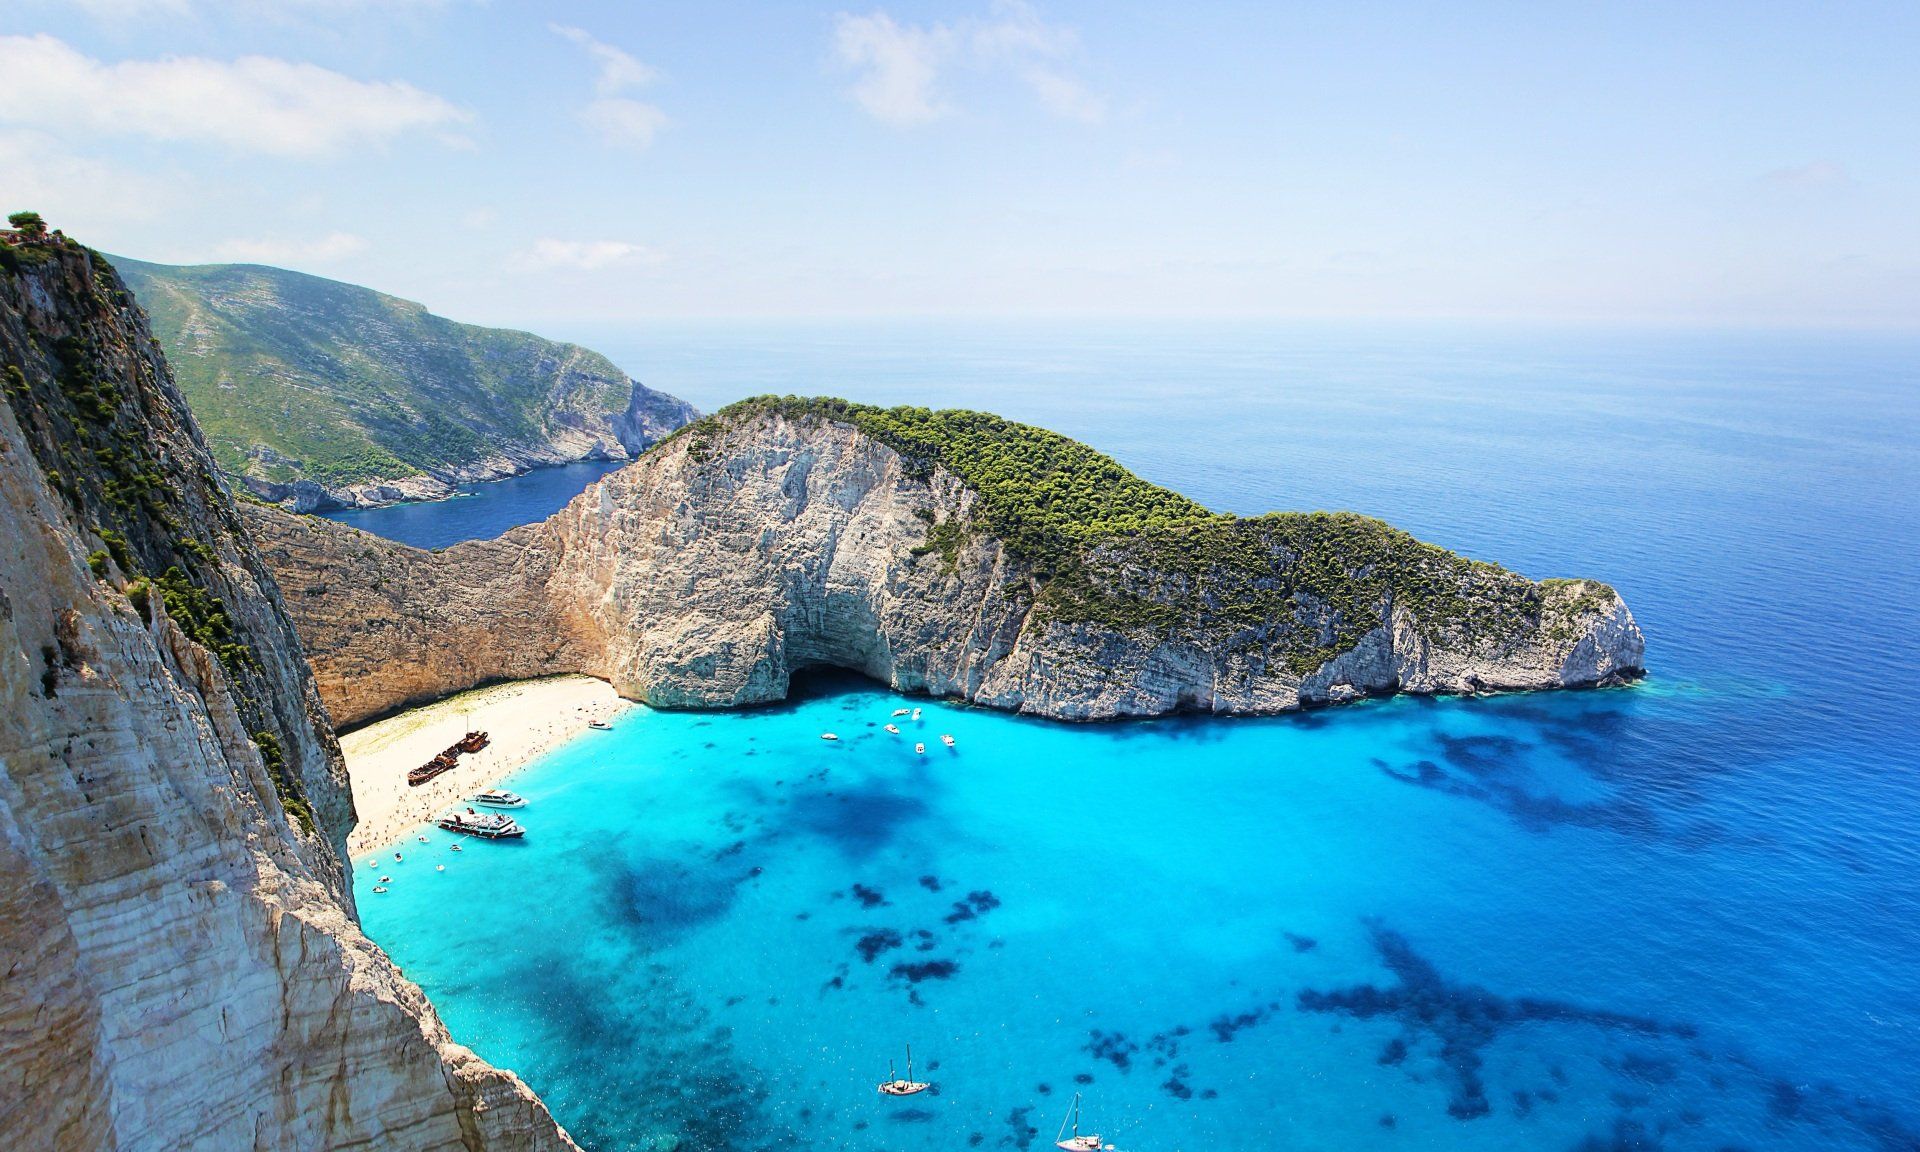 Navagio Beach, or Shipwreck Beach, Smugglers Cove, Zakynthos, in the Ionian Islands of Greece - Cruise Holidays Barter's Travelnet